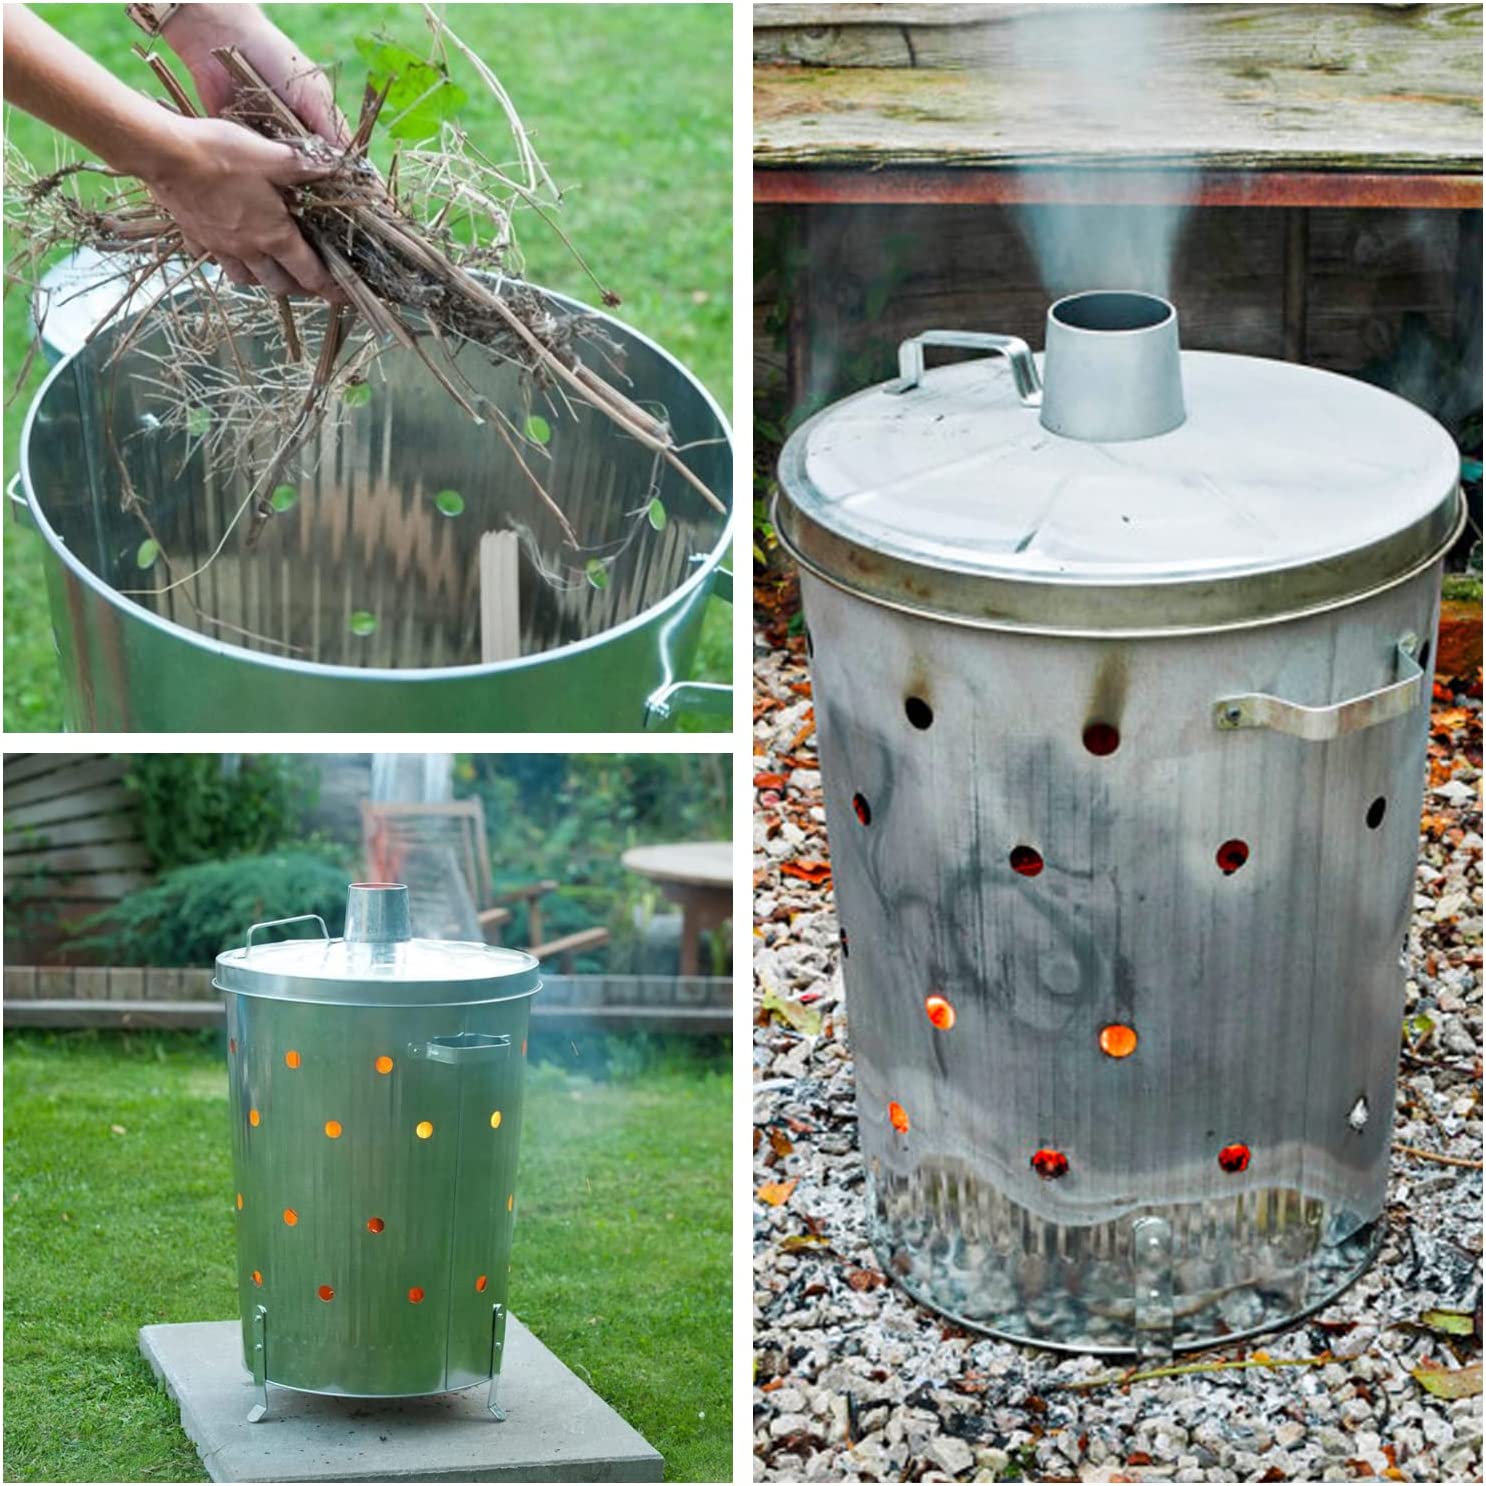 How To Use A Garden Incinerator